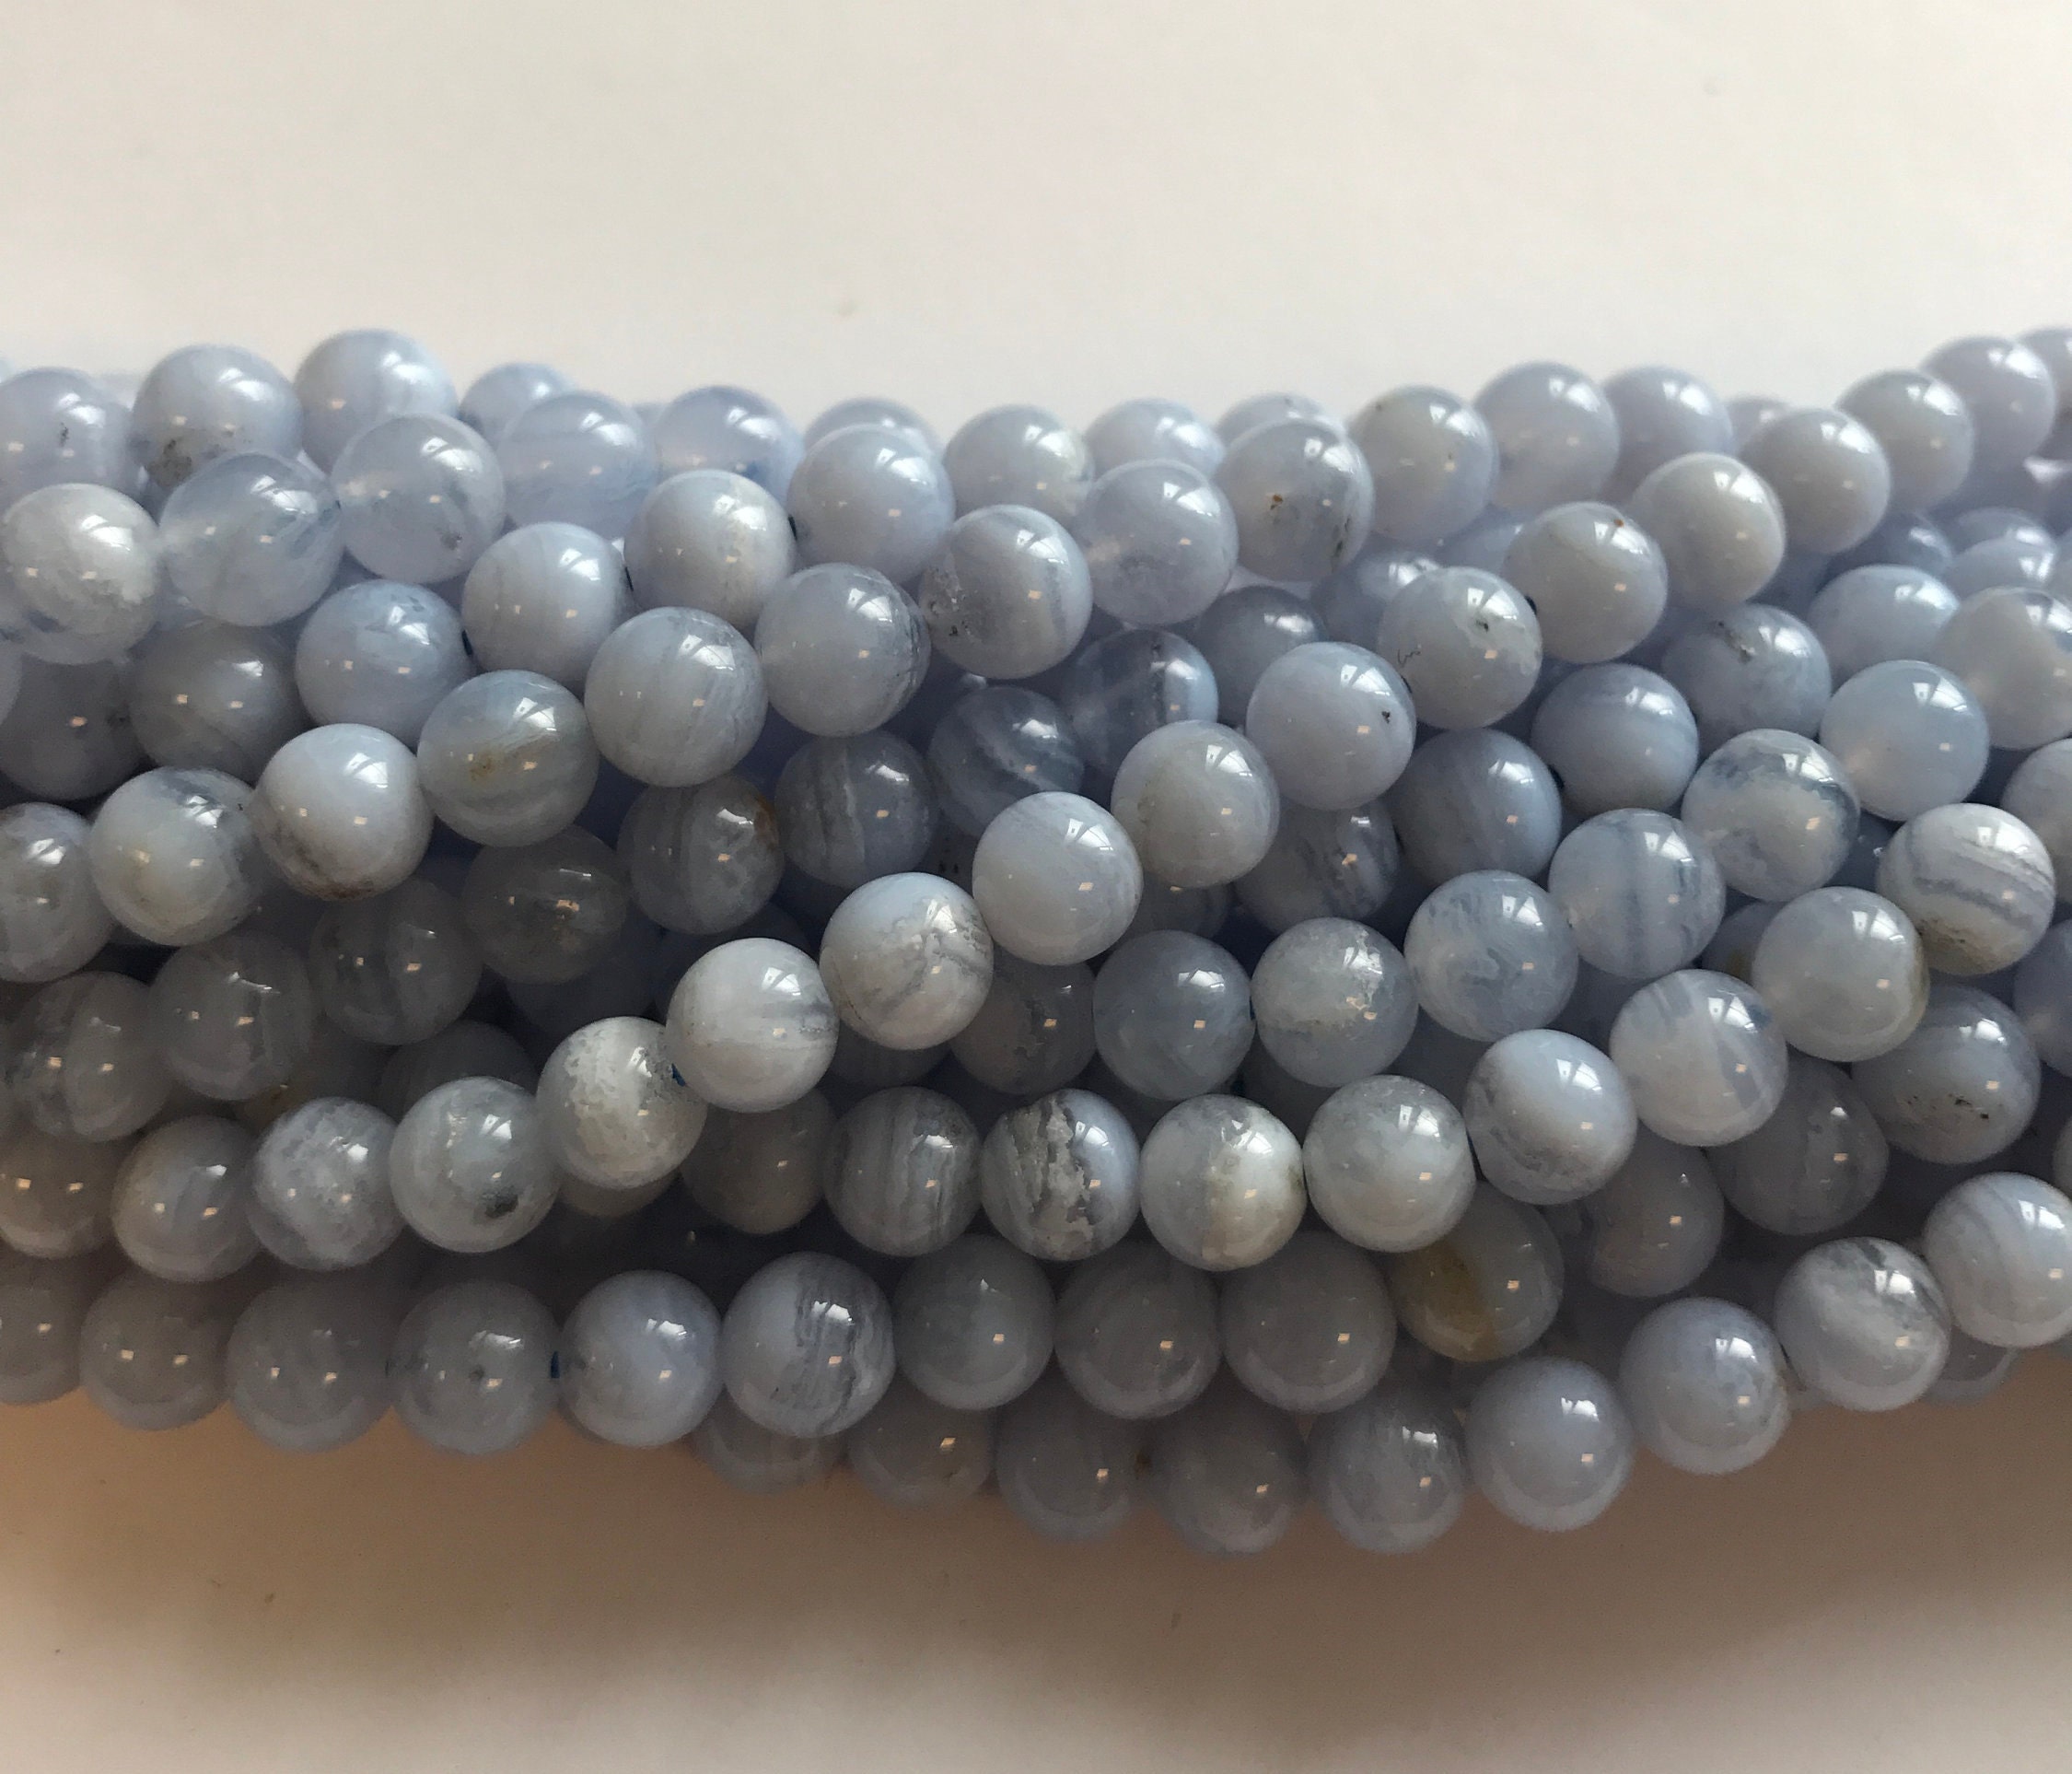 15" Strand Natural Gray Lace Stone Gemstone Beads lot 4mm 6mm 8mm 10mm 12mm 